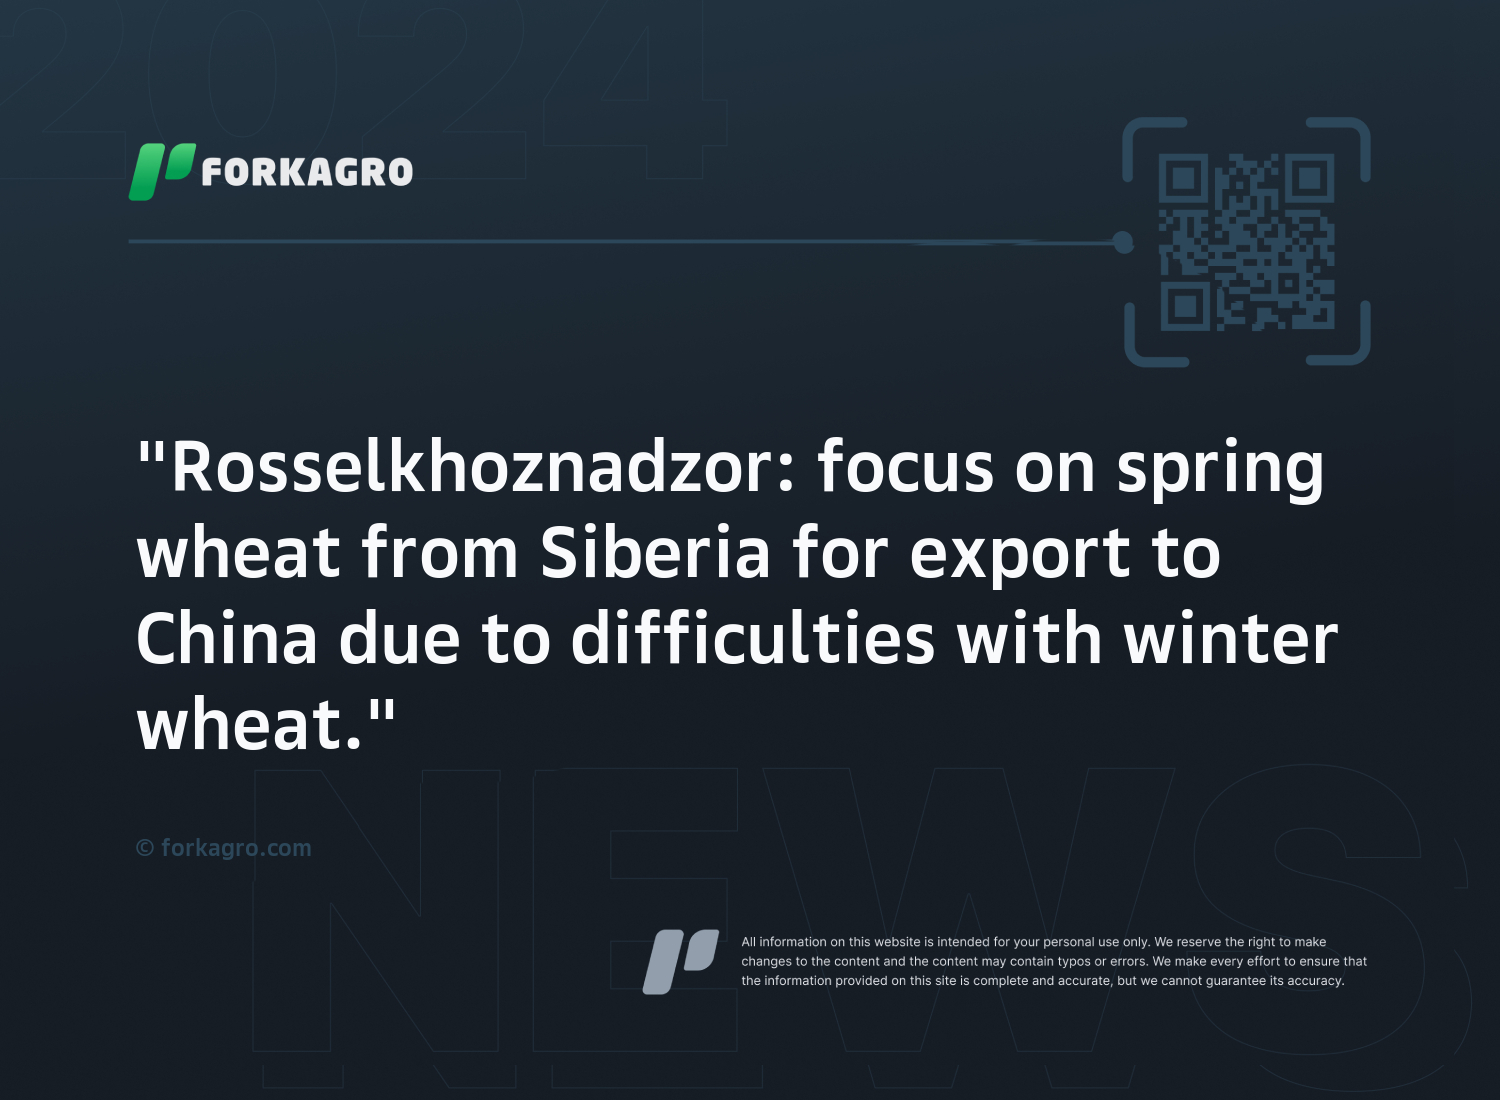 "Rosselkhoznadzor: focus on spring wheat from Siberia for export to China due to difficulties with winter wheat."